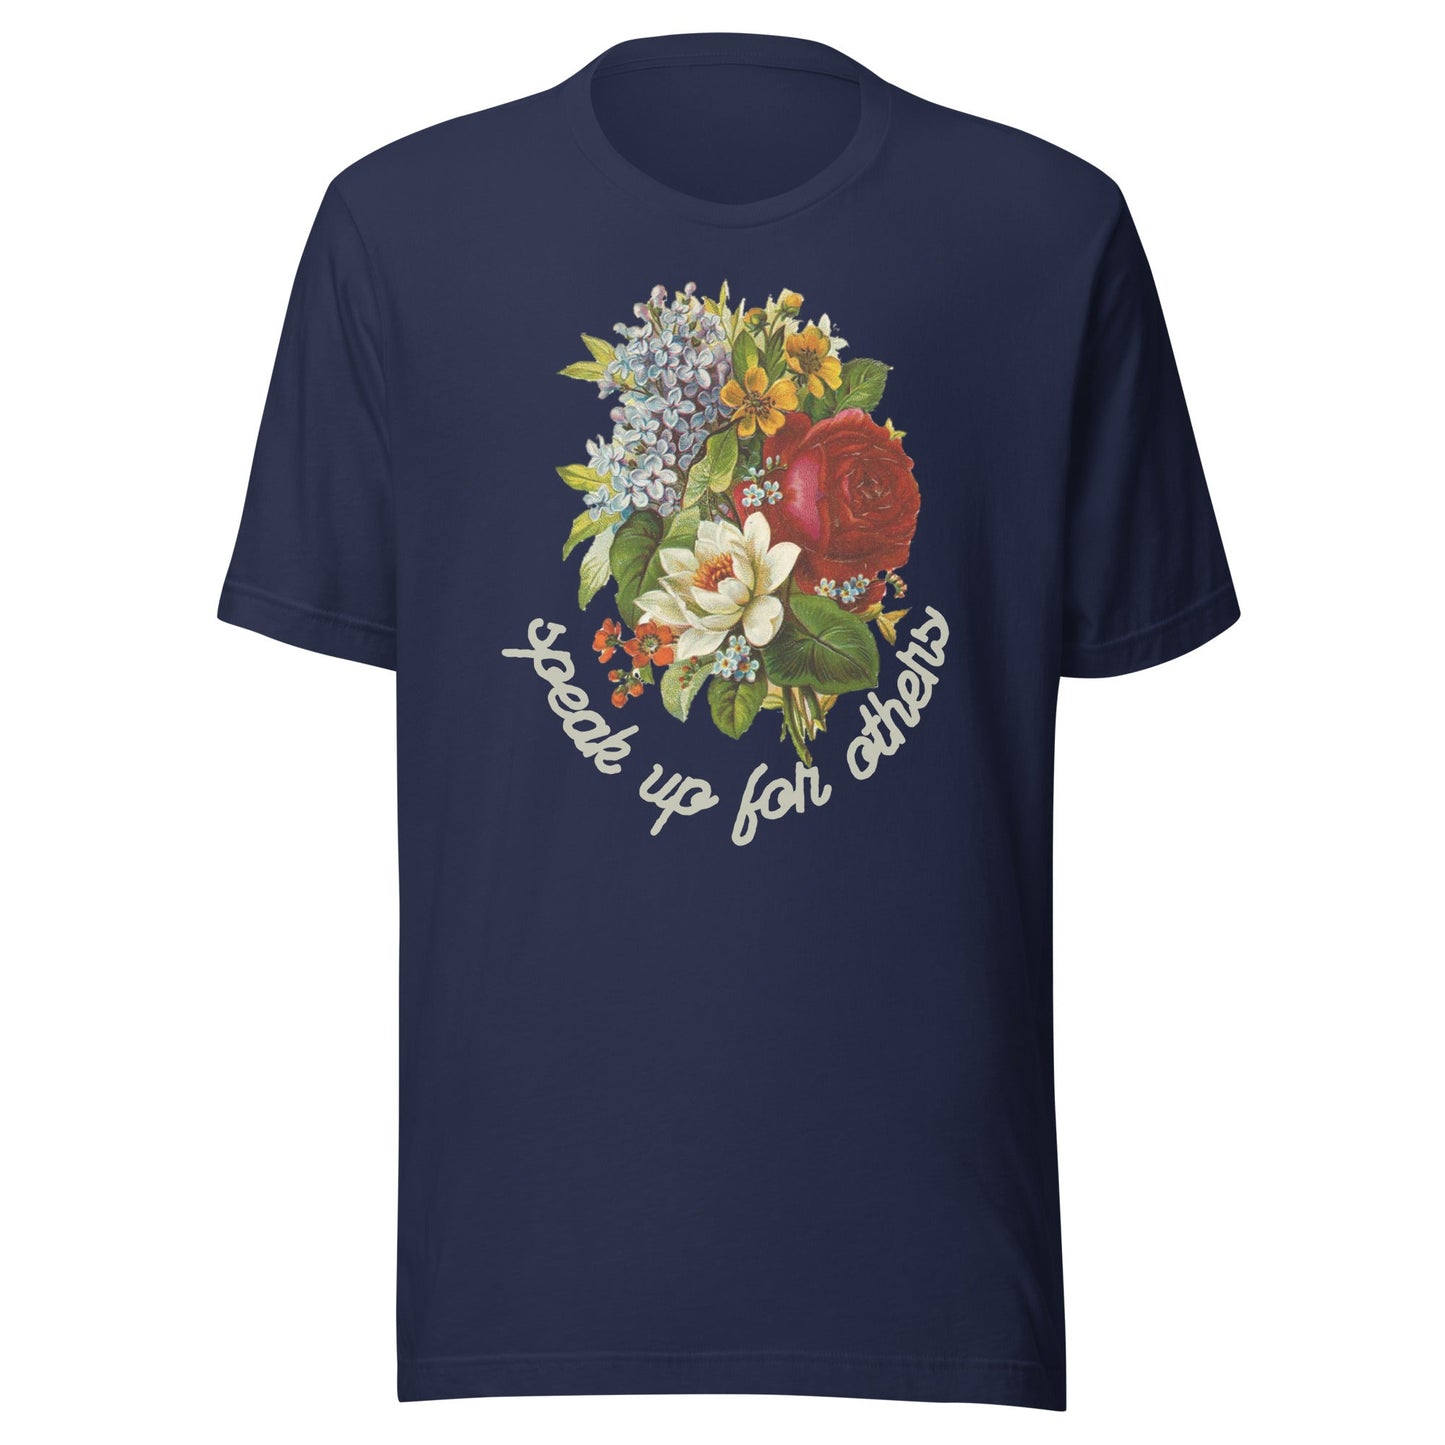 Speak Up for Others Floral Unisex t-shirt-recalciGrant